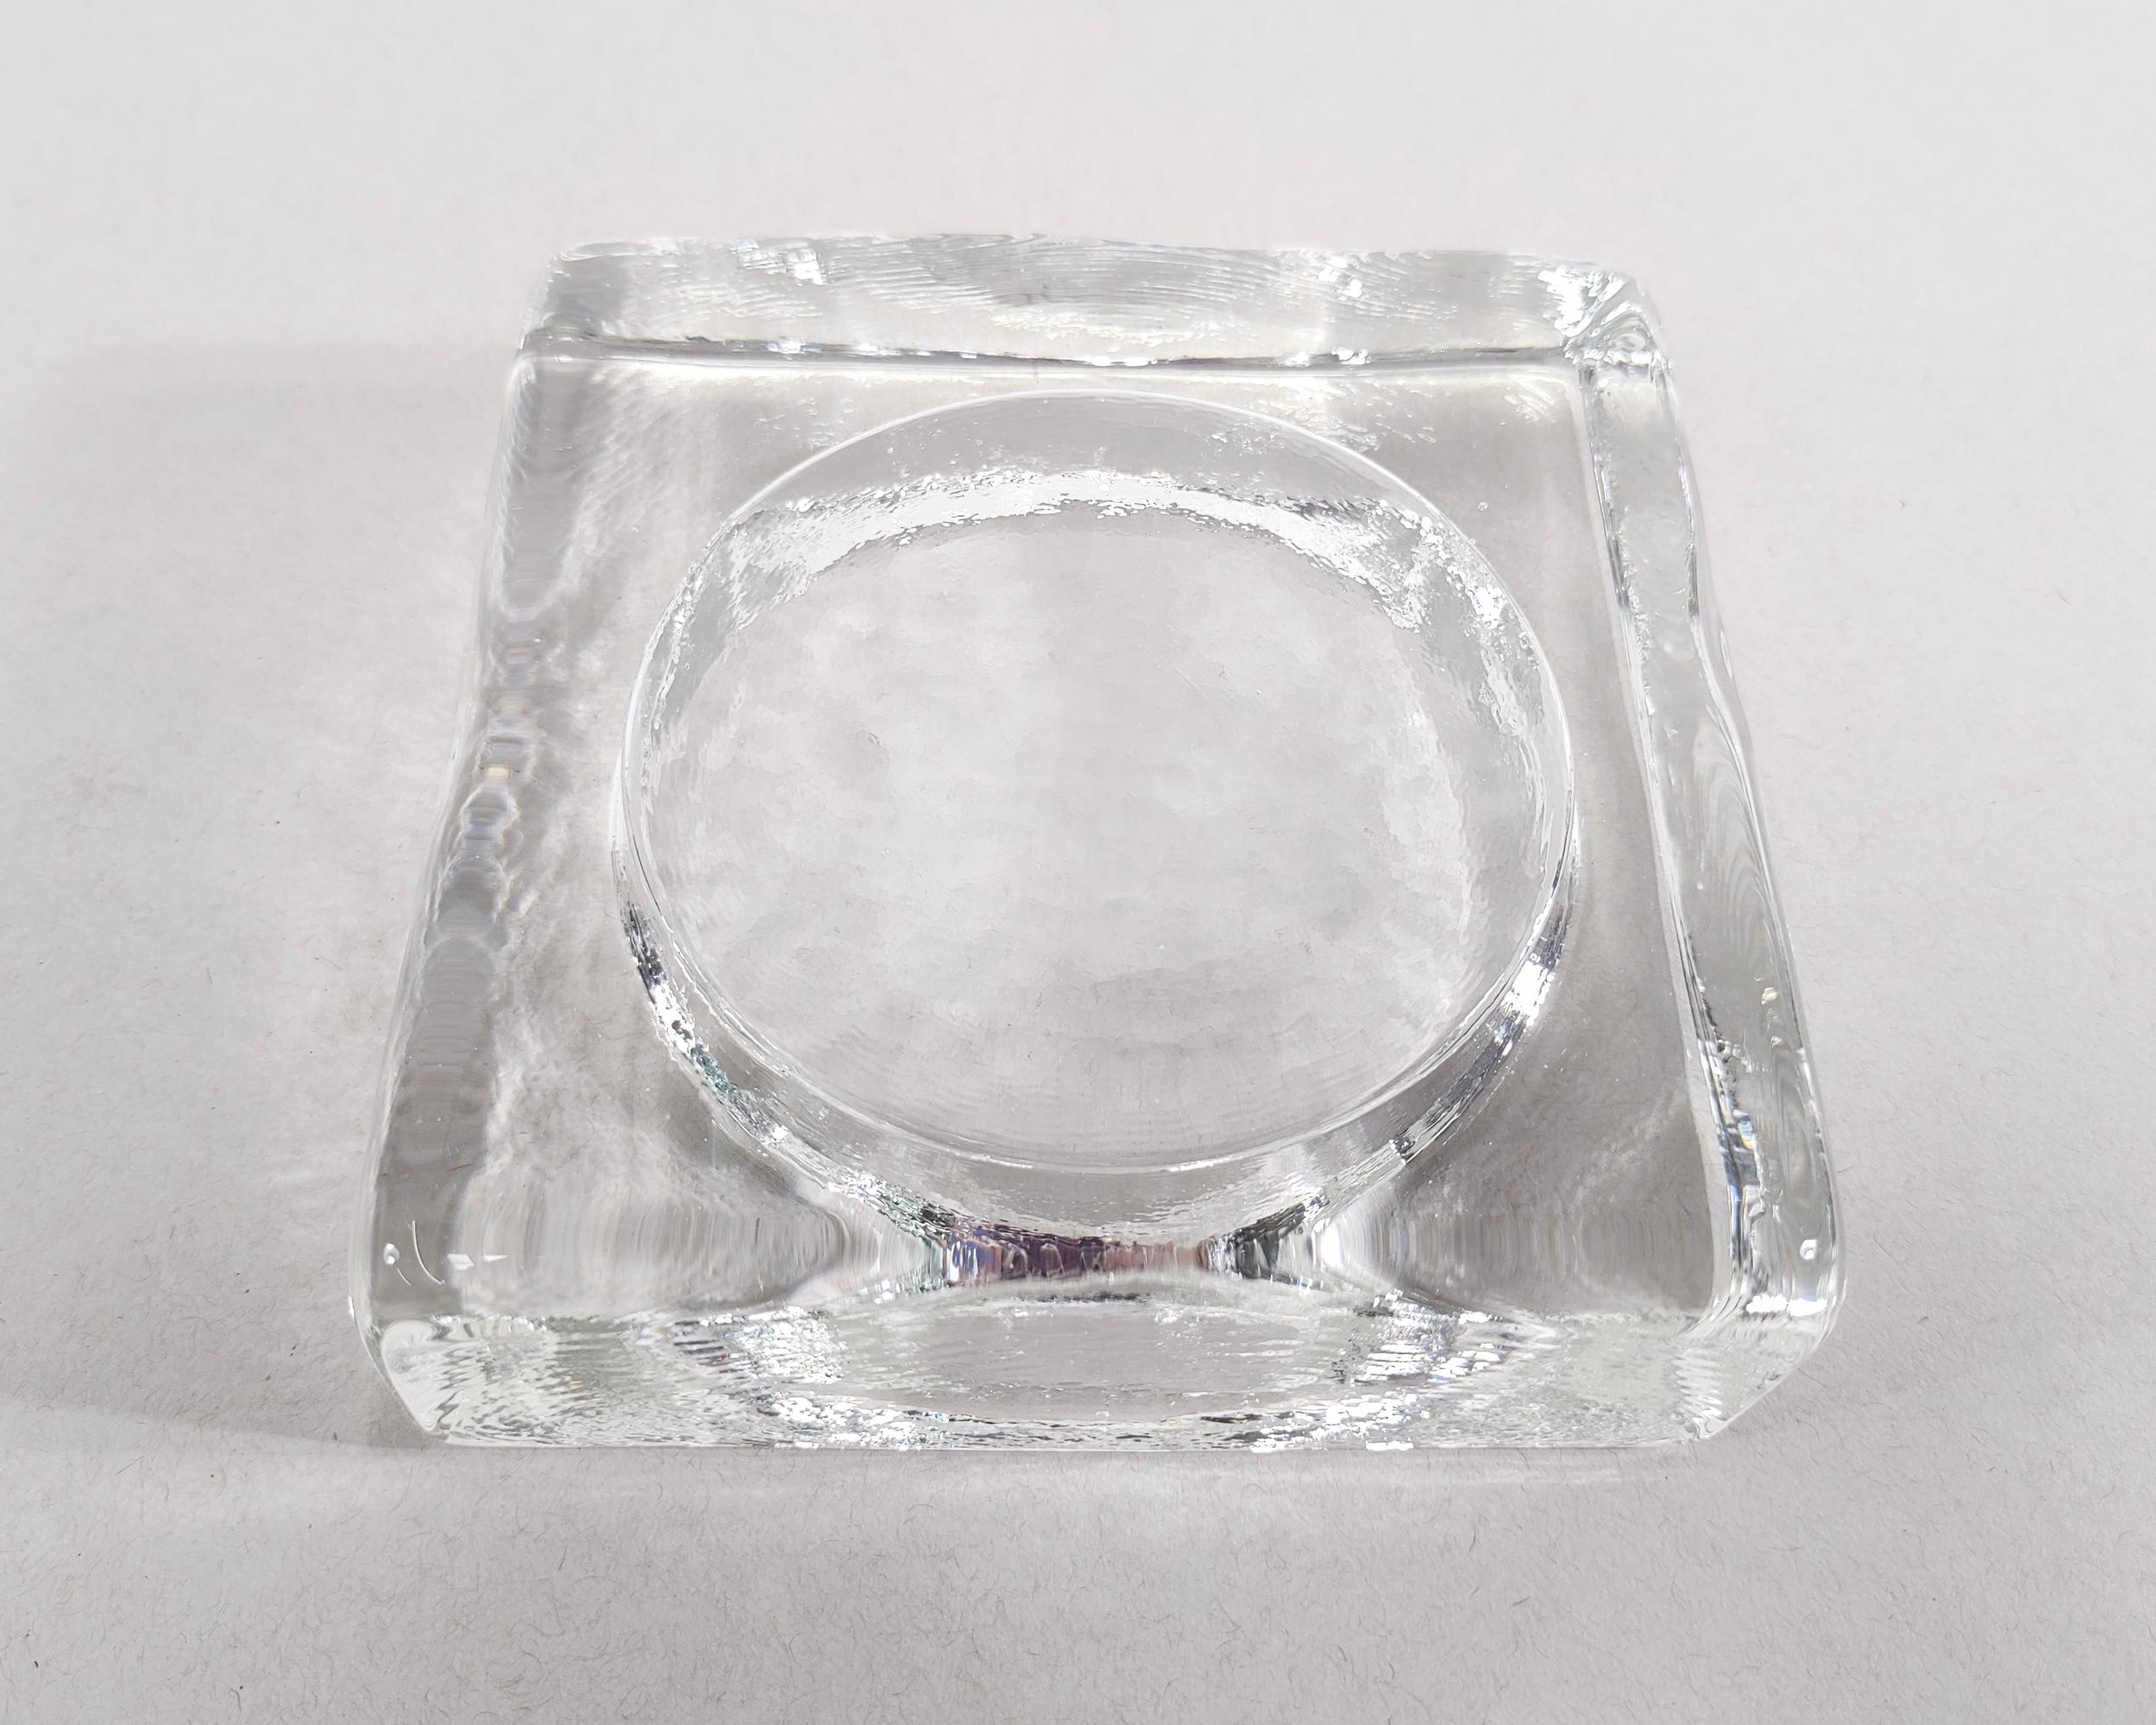 Organic glass square block catchall. Beautiful wavy casting details give it an icy vibe. Excellent vintage condition.